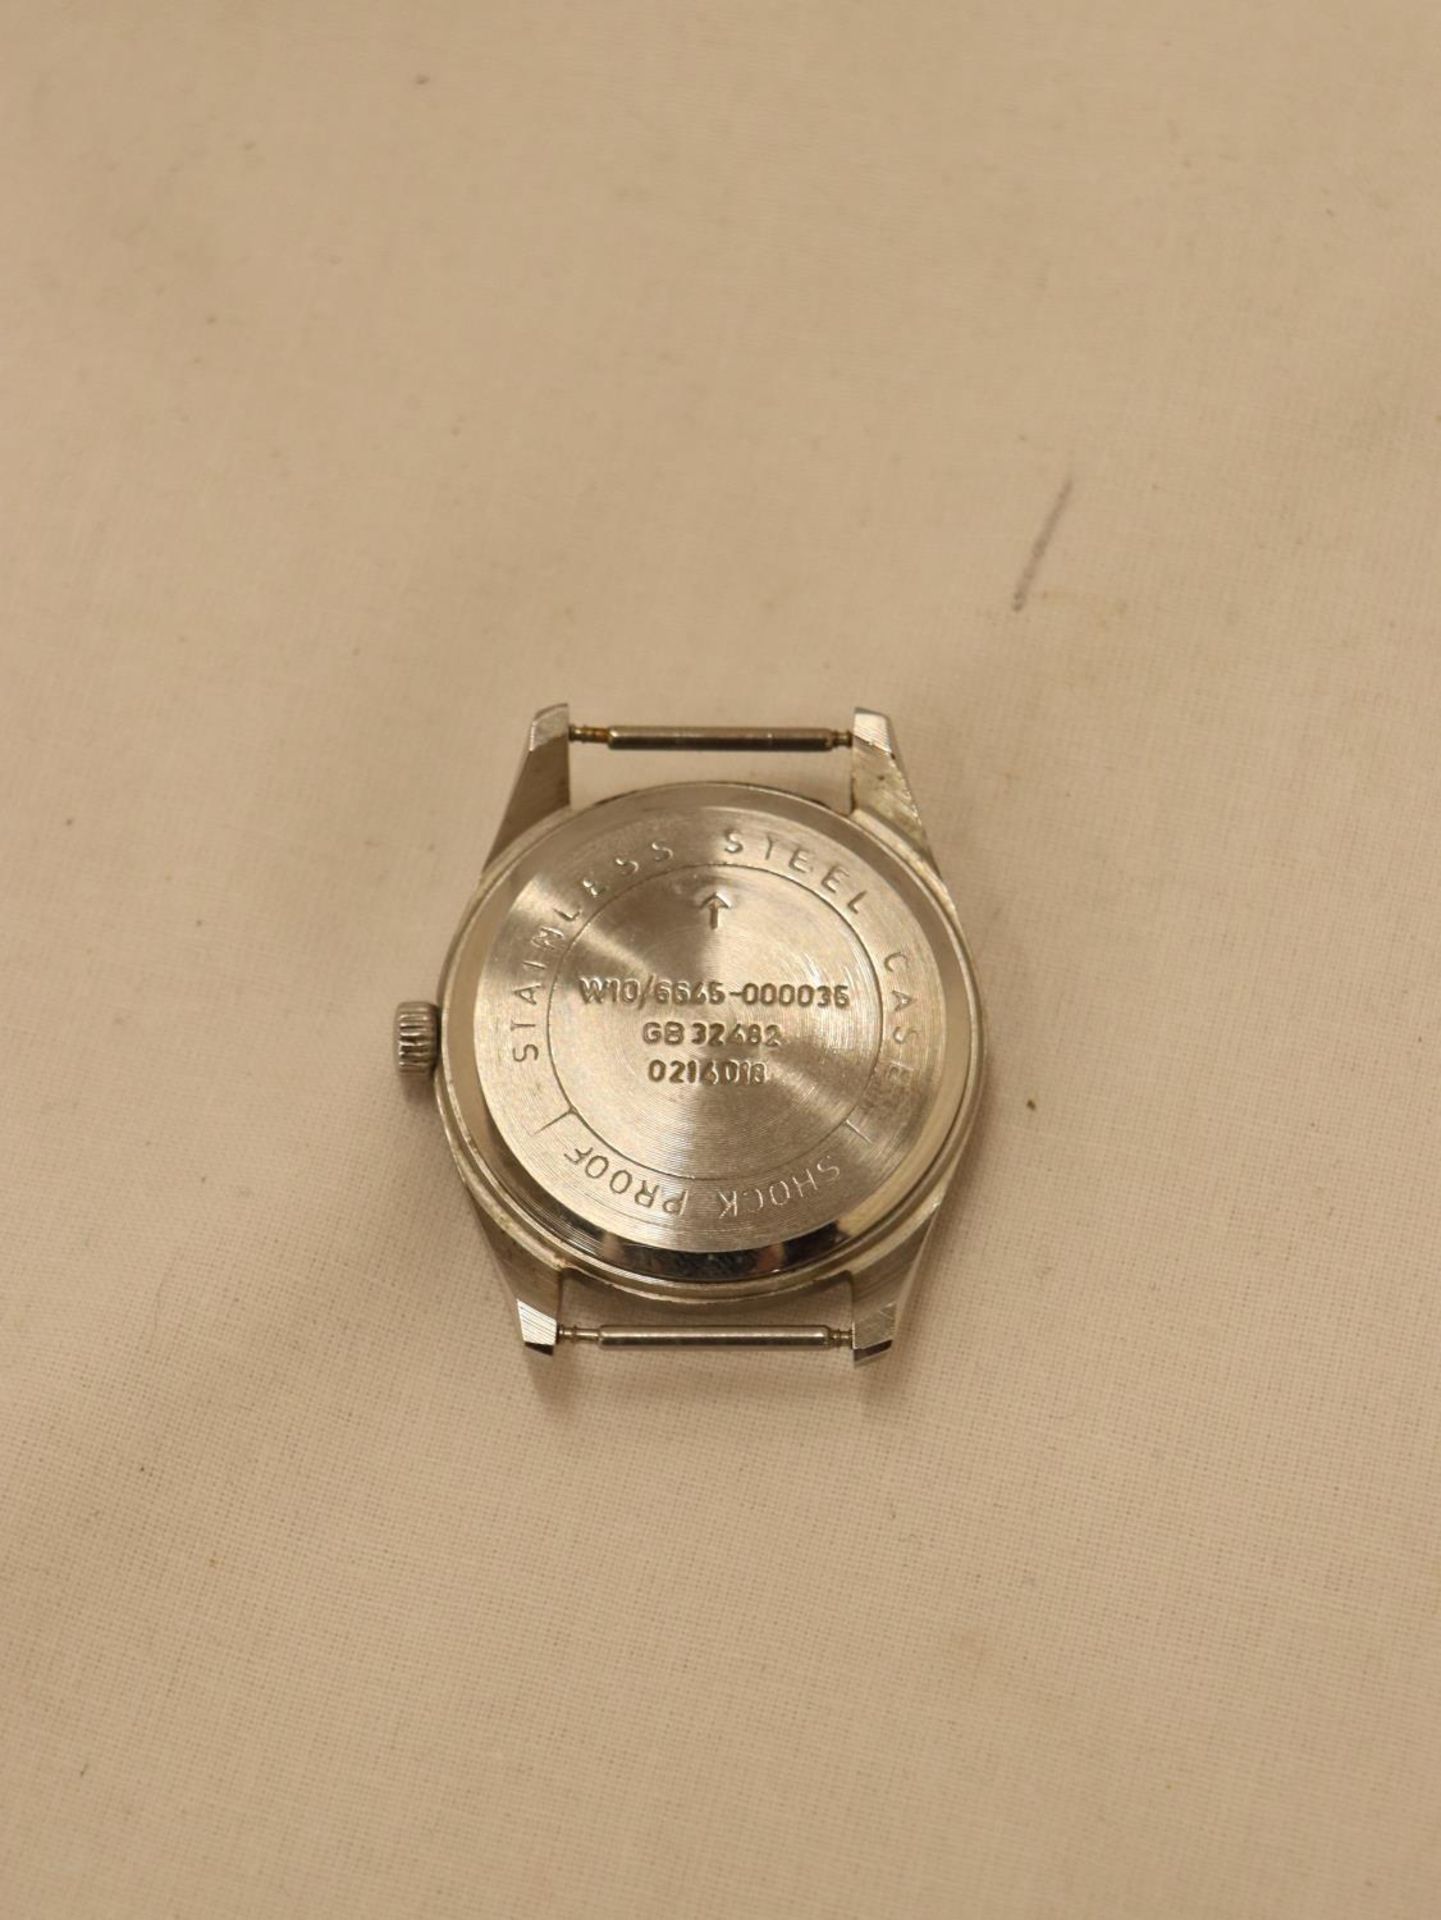 A VINTAGE HMT MILITARY WATCH - Image 3 of 3